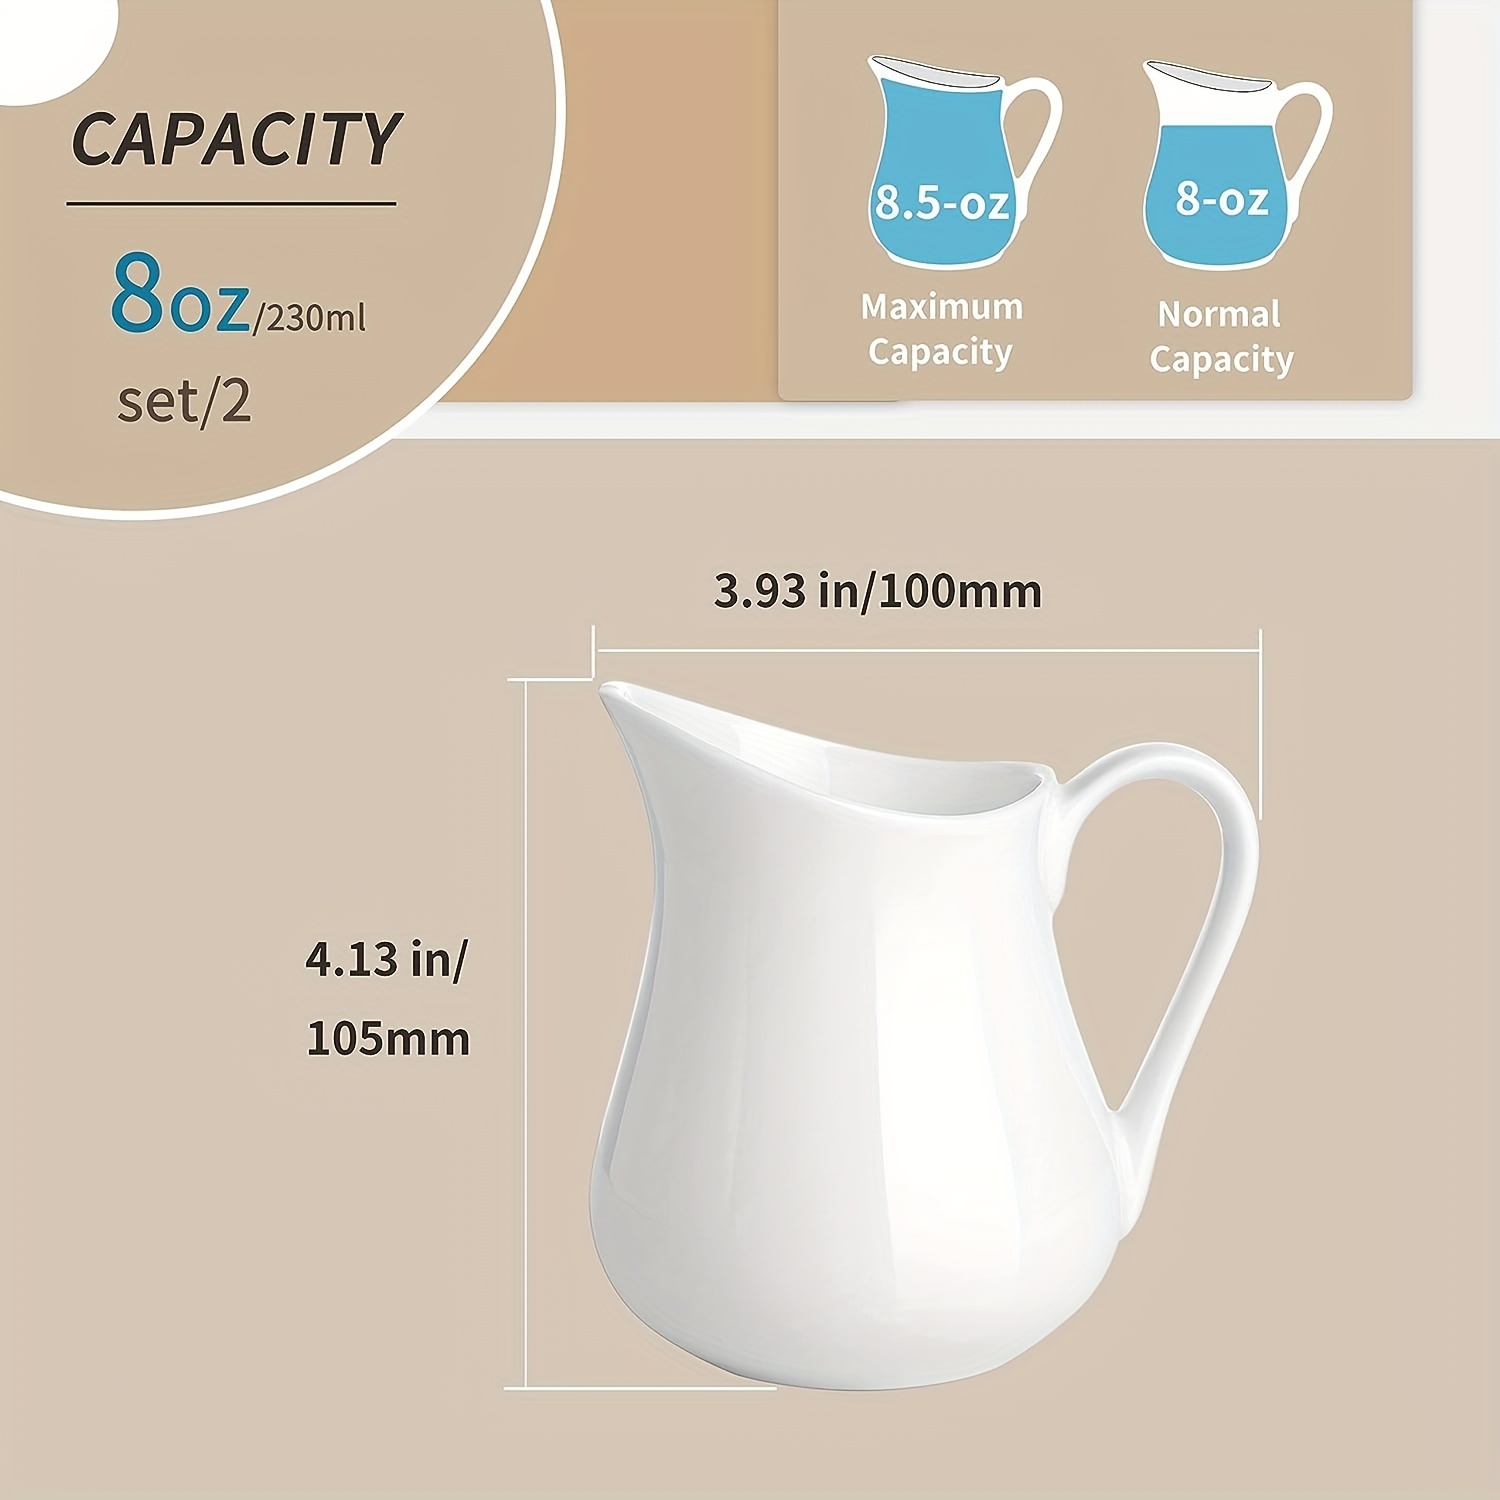 HIC Kitchen HIC Creamer Pitcher with Handle, Fine White Porcelain, 4-Ounces